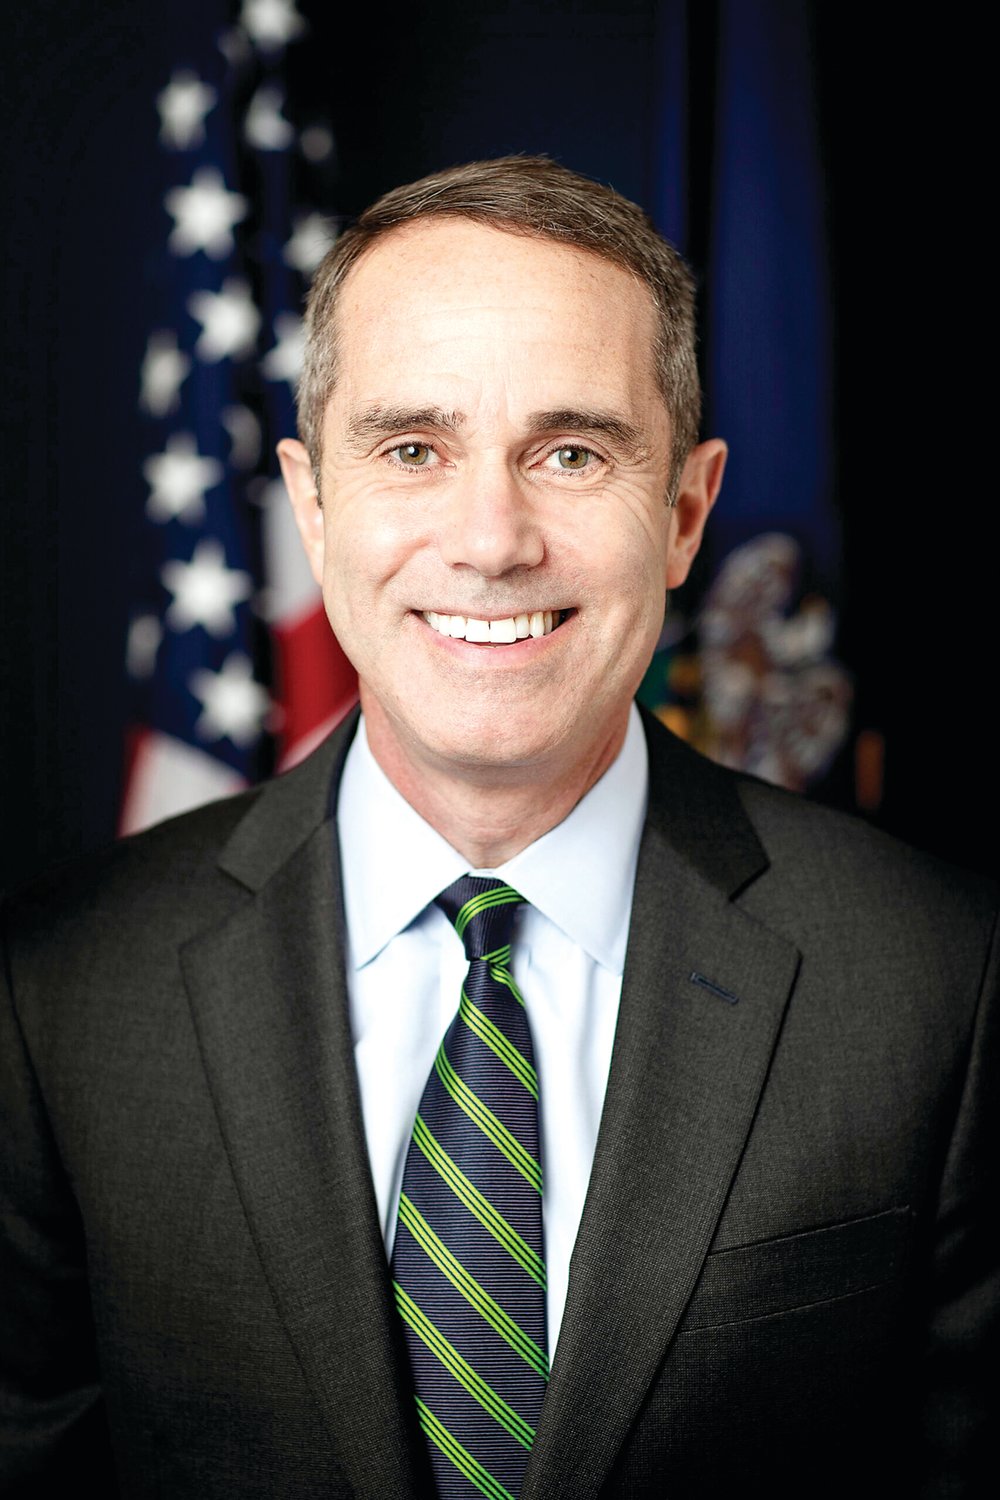 Sen. Steve Santarsiero, a Democrat, represents the 10th PA Senatorial District, which consists of Bristol, Buckingham, Doylestown, Falls, Lower Makefield, New Britain, Newtown, Plumstead, Solebury and Upper Makefield townships as well as the boroughs of Bristol, Chalfont, Doylestown, Morrisville, New Britain, New Hope, Newtown, Tullytown and Yardley.